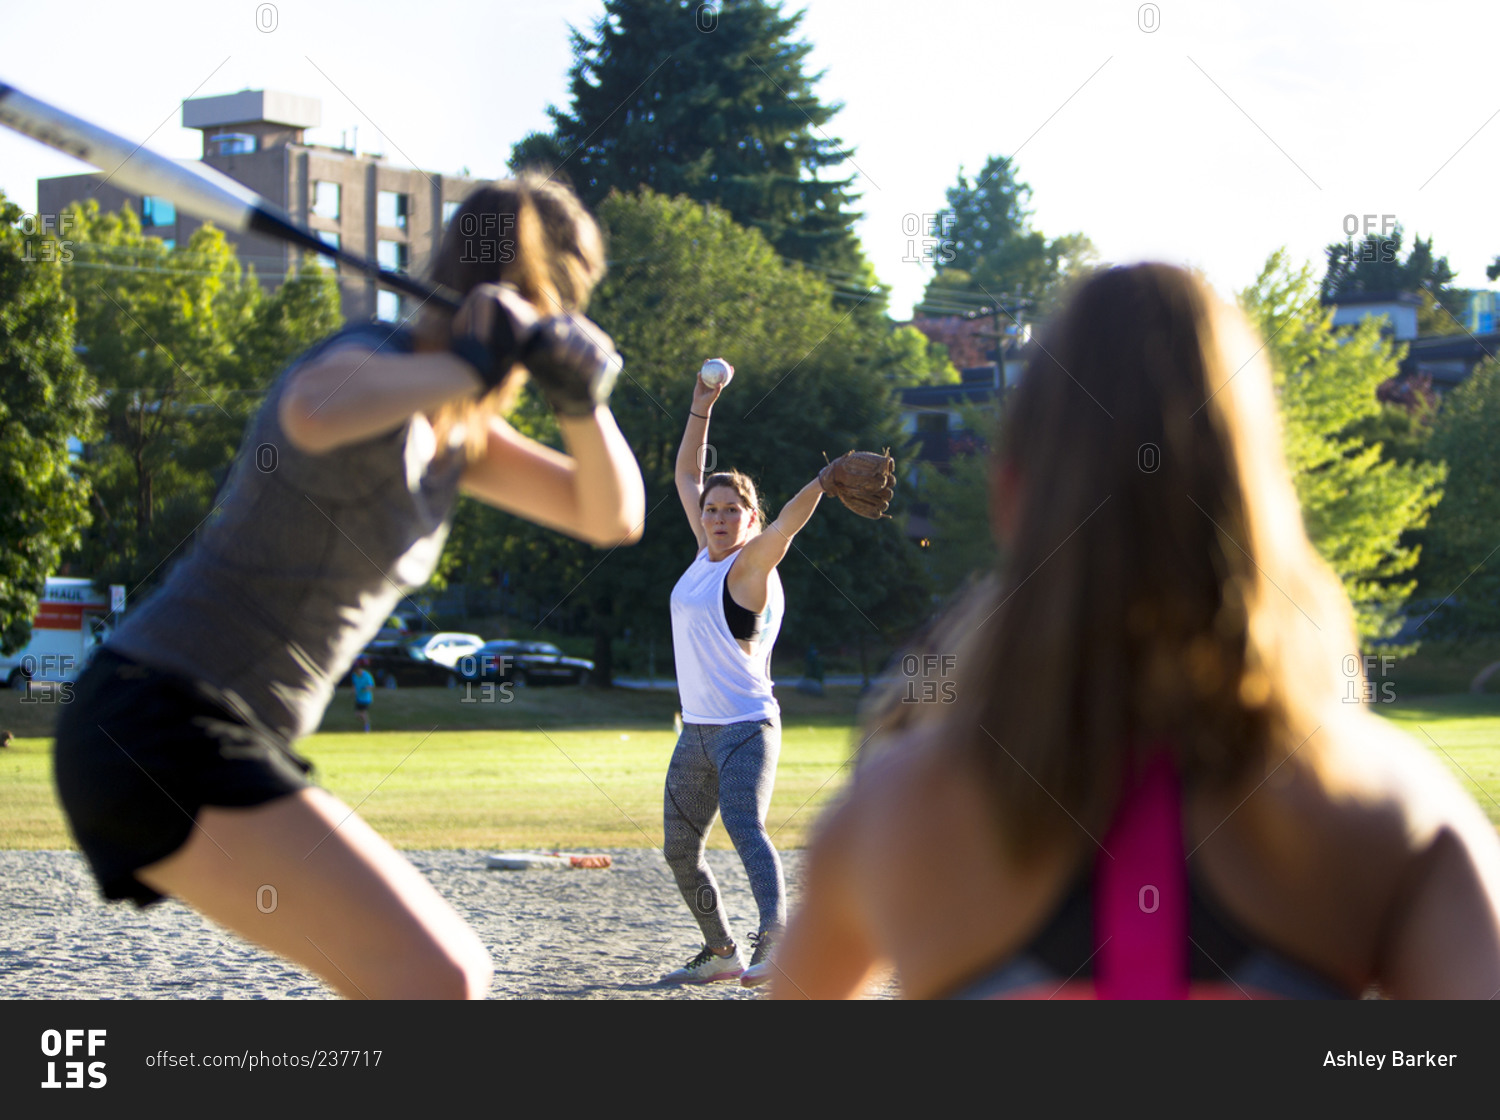 Pitcher winding up during a softball game in Vancouver, Canada